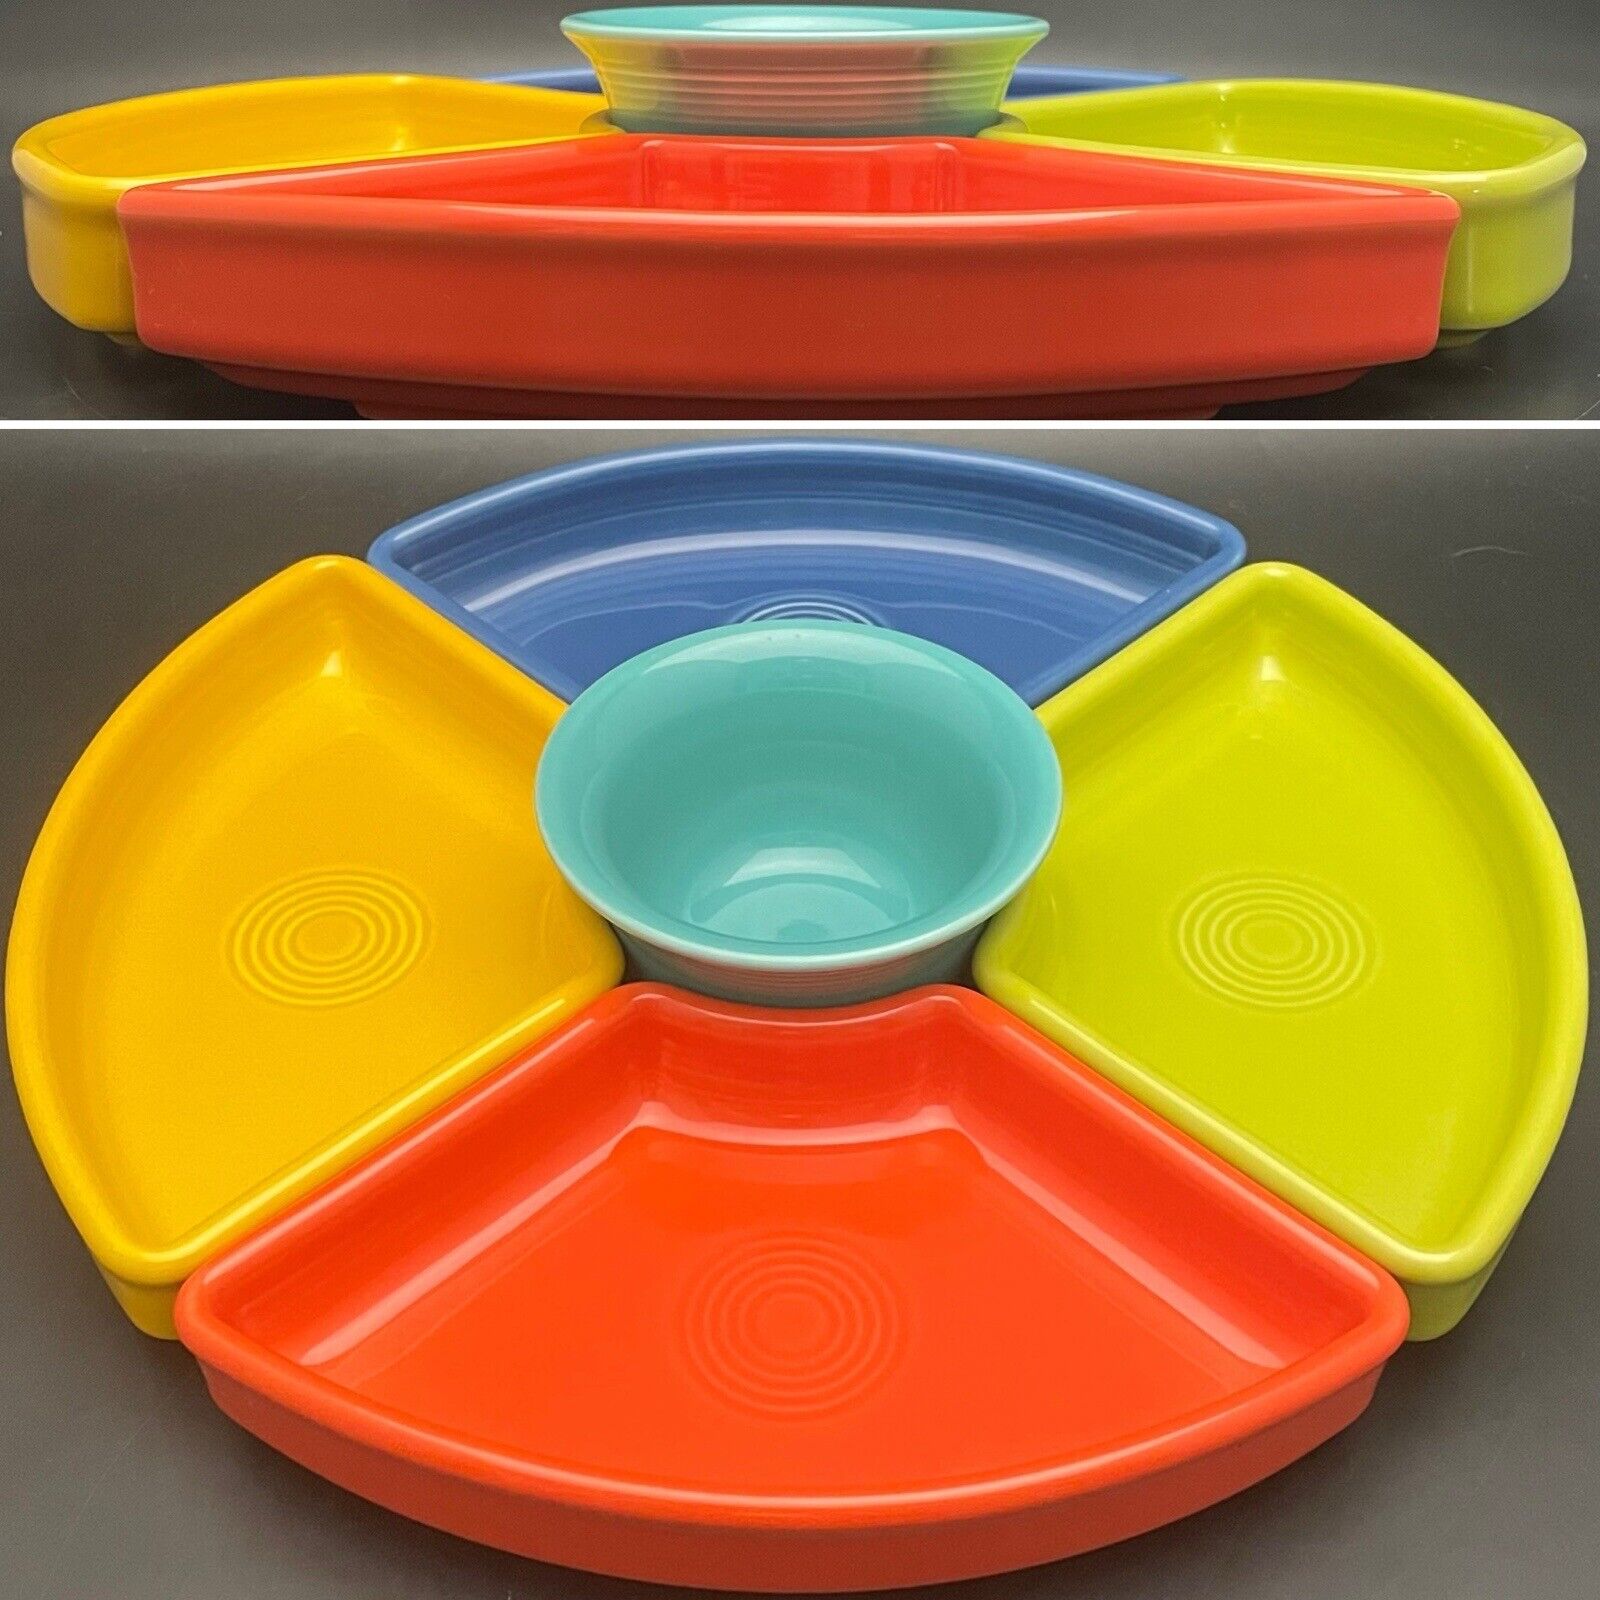 Fiesta HLC Bright Colors 5 Piece Relish Snack Set c1980s Made in USA 12.5